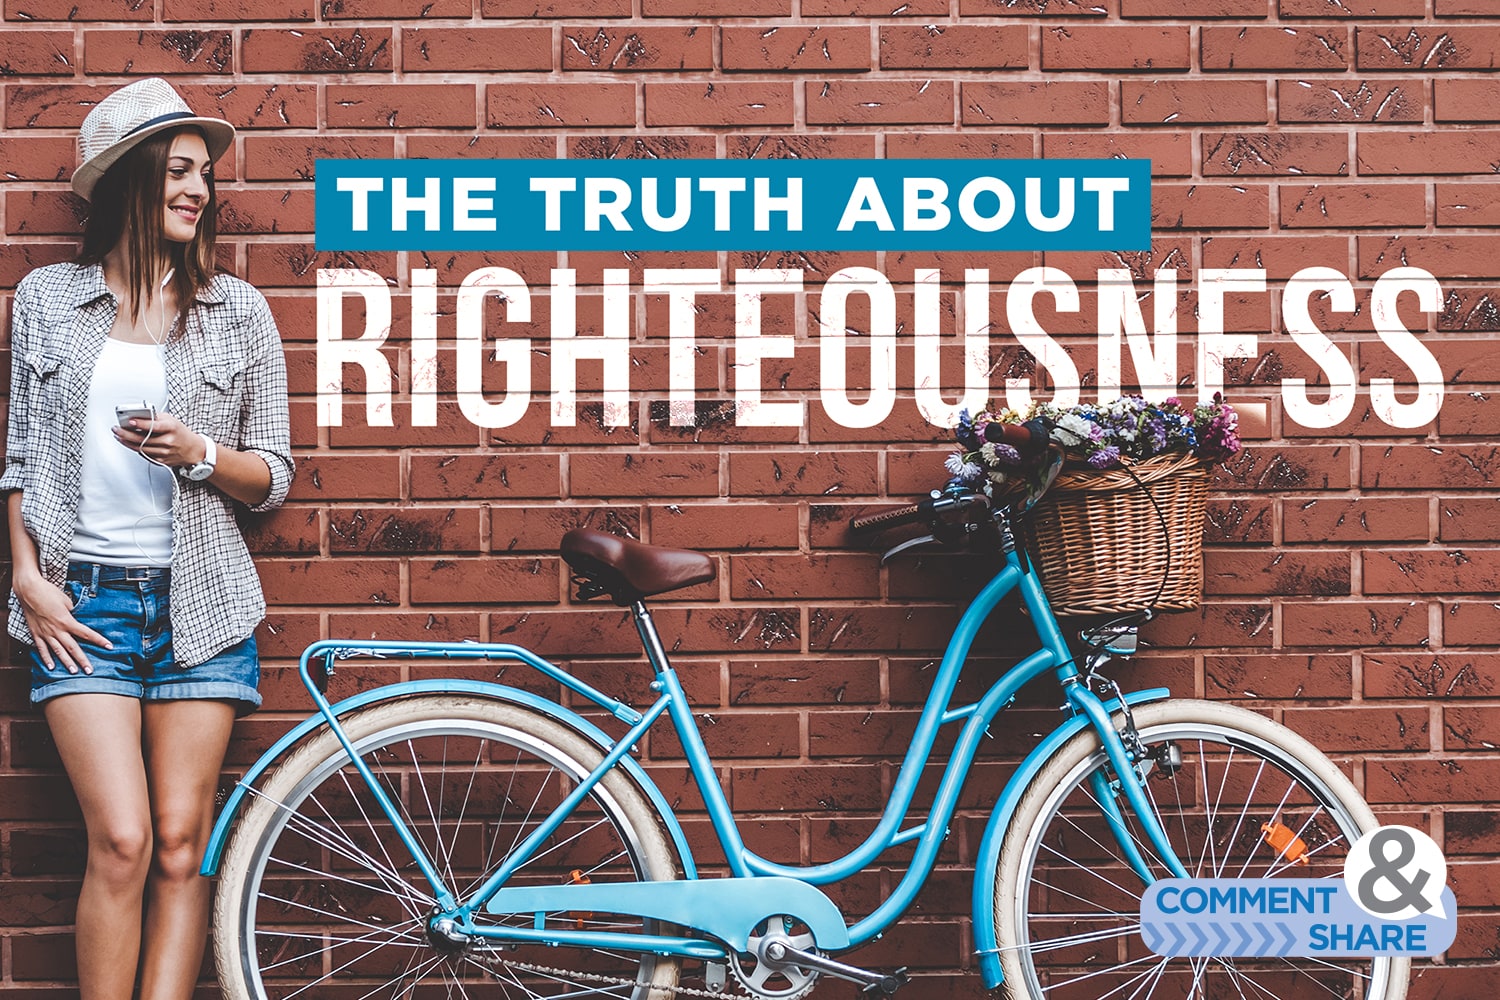 The Truth About Righteousness